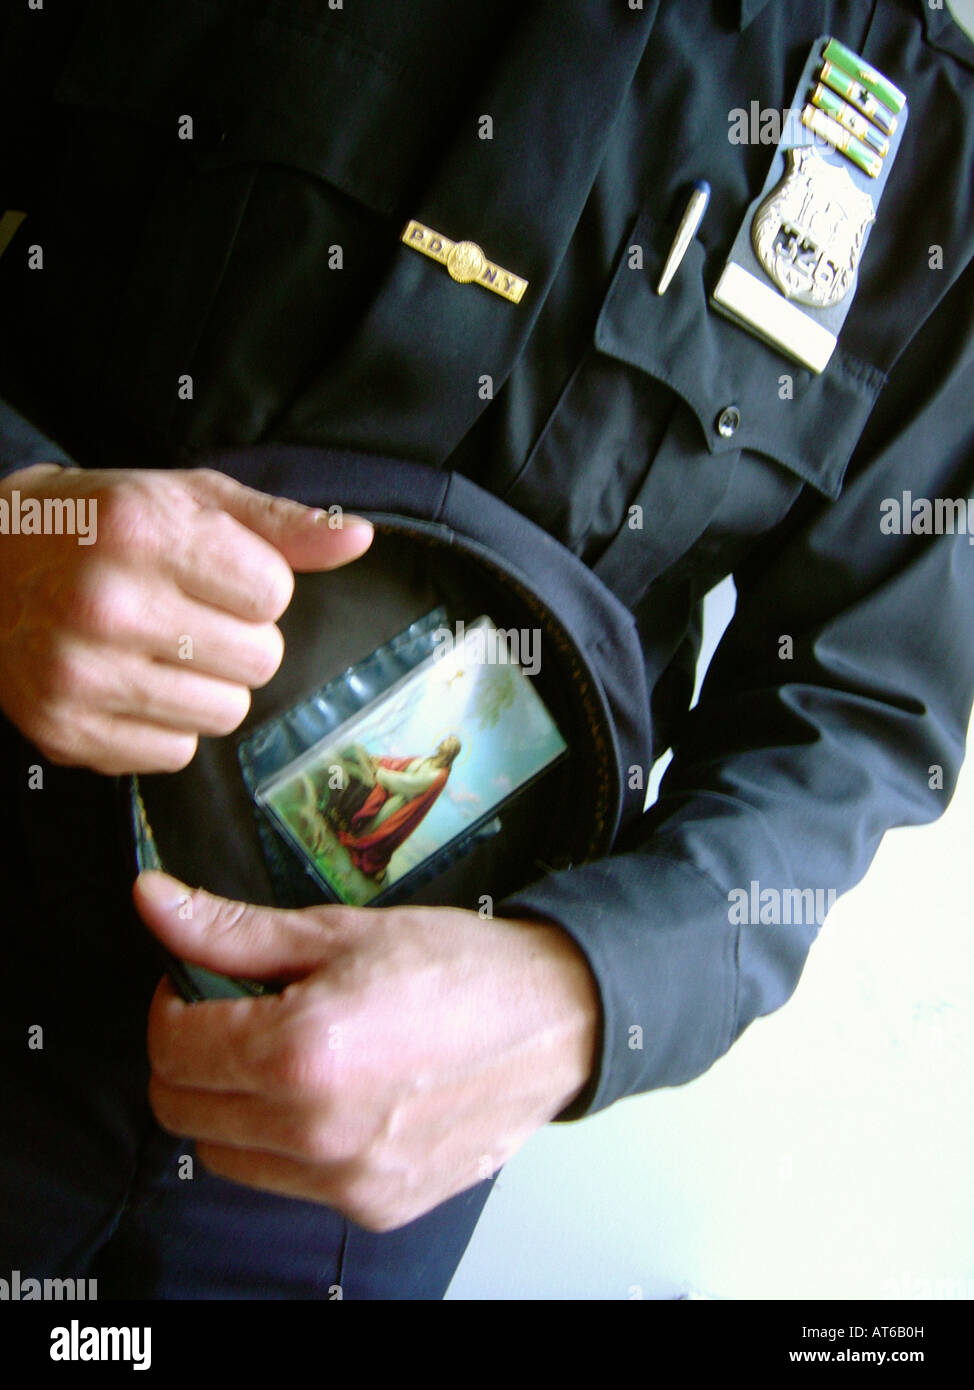 Artistic Portrait of a New York City Police Officer Holding His Hat Which Has a Prayer Card With An Image of Jesus Christ On It Stock Photo